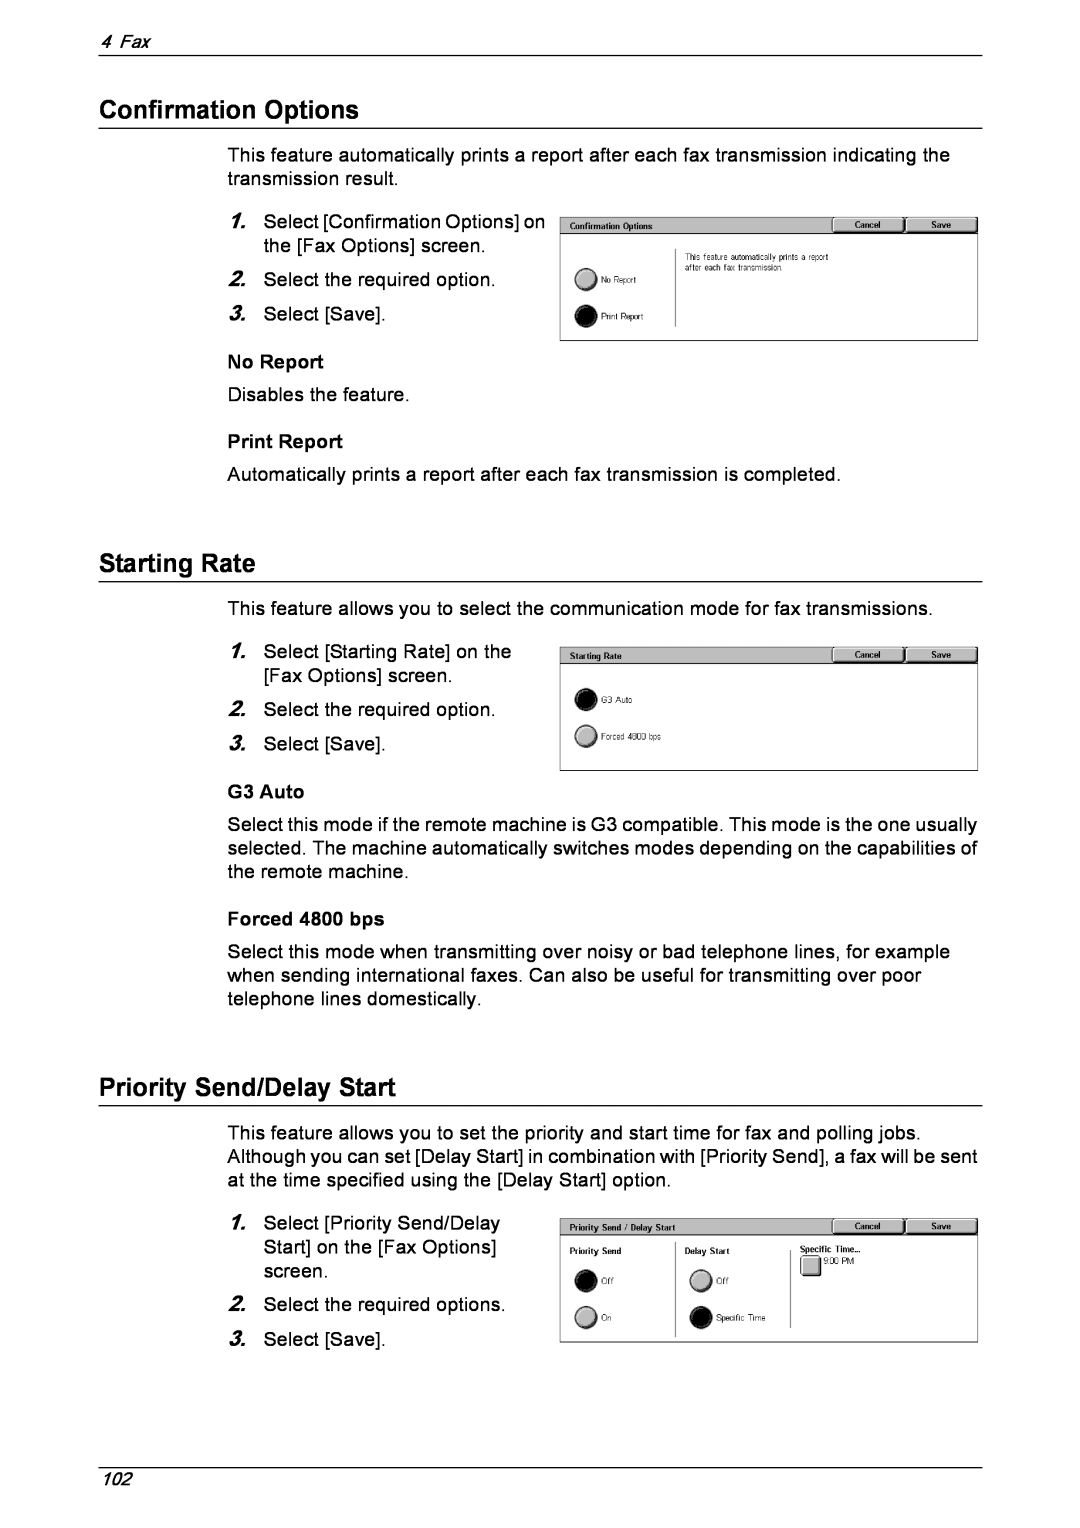 Xerox 5230 manual Confirmation Options, Starting Rate, Priority Send/Delay Start, Print Report, G3 Auto, Forced 4800 bps 